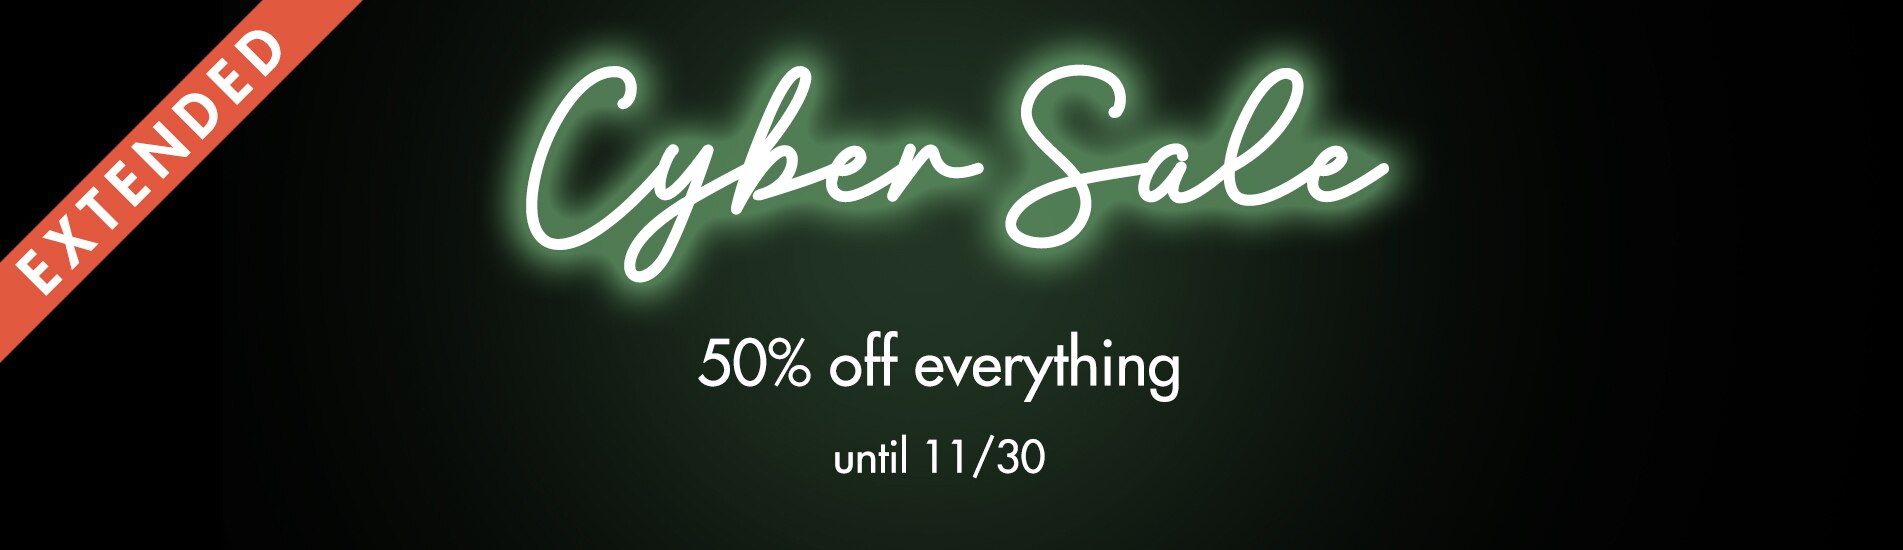 Cyber Sale Extended starts now, take 50% off everything